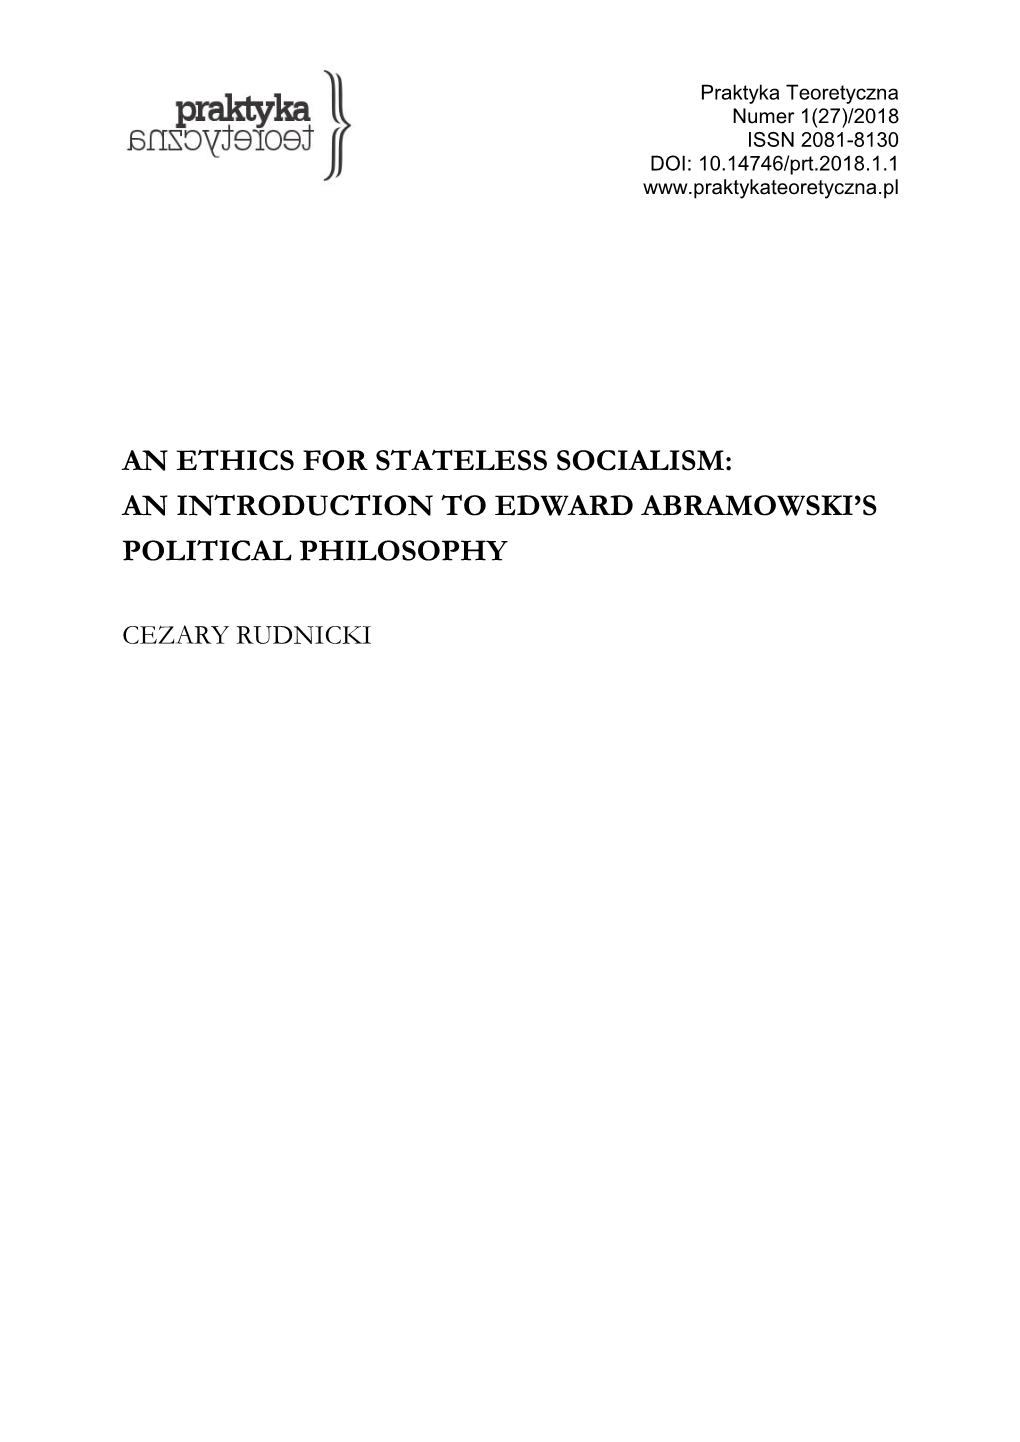 An Ethics for Stateless Socialism: an Introduction to Edward Abramowski’S Political Philosophy